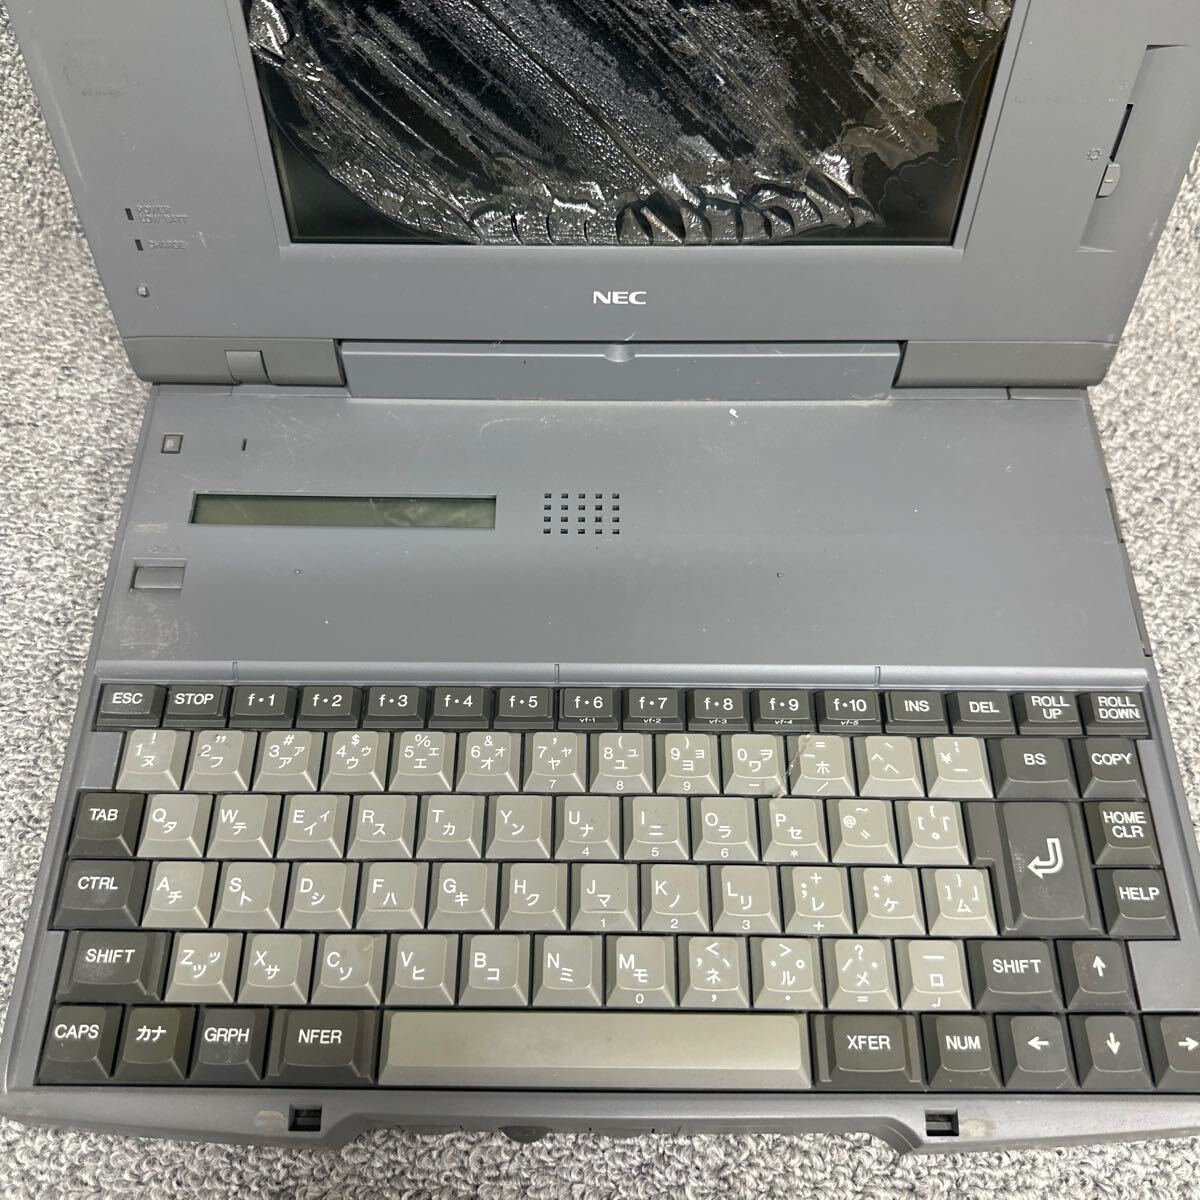 PCN98-1618 super-discount PC98 notebook NEC PC-9821Ns/340W electrification un- possible Junk including in a package possibility 